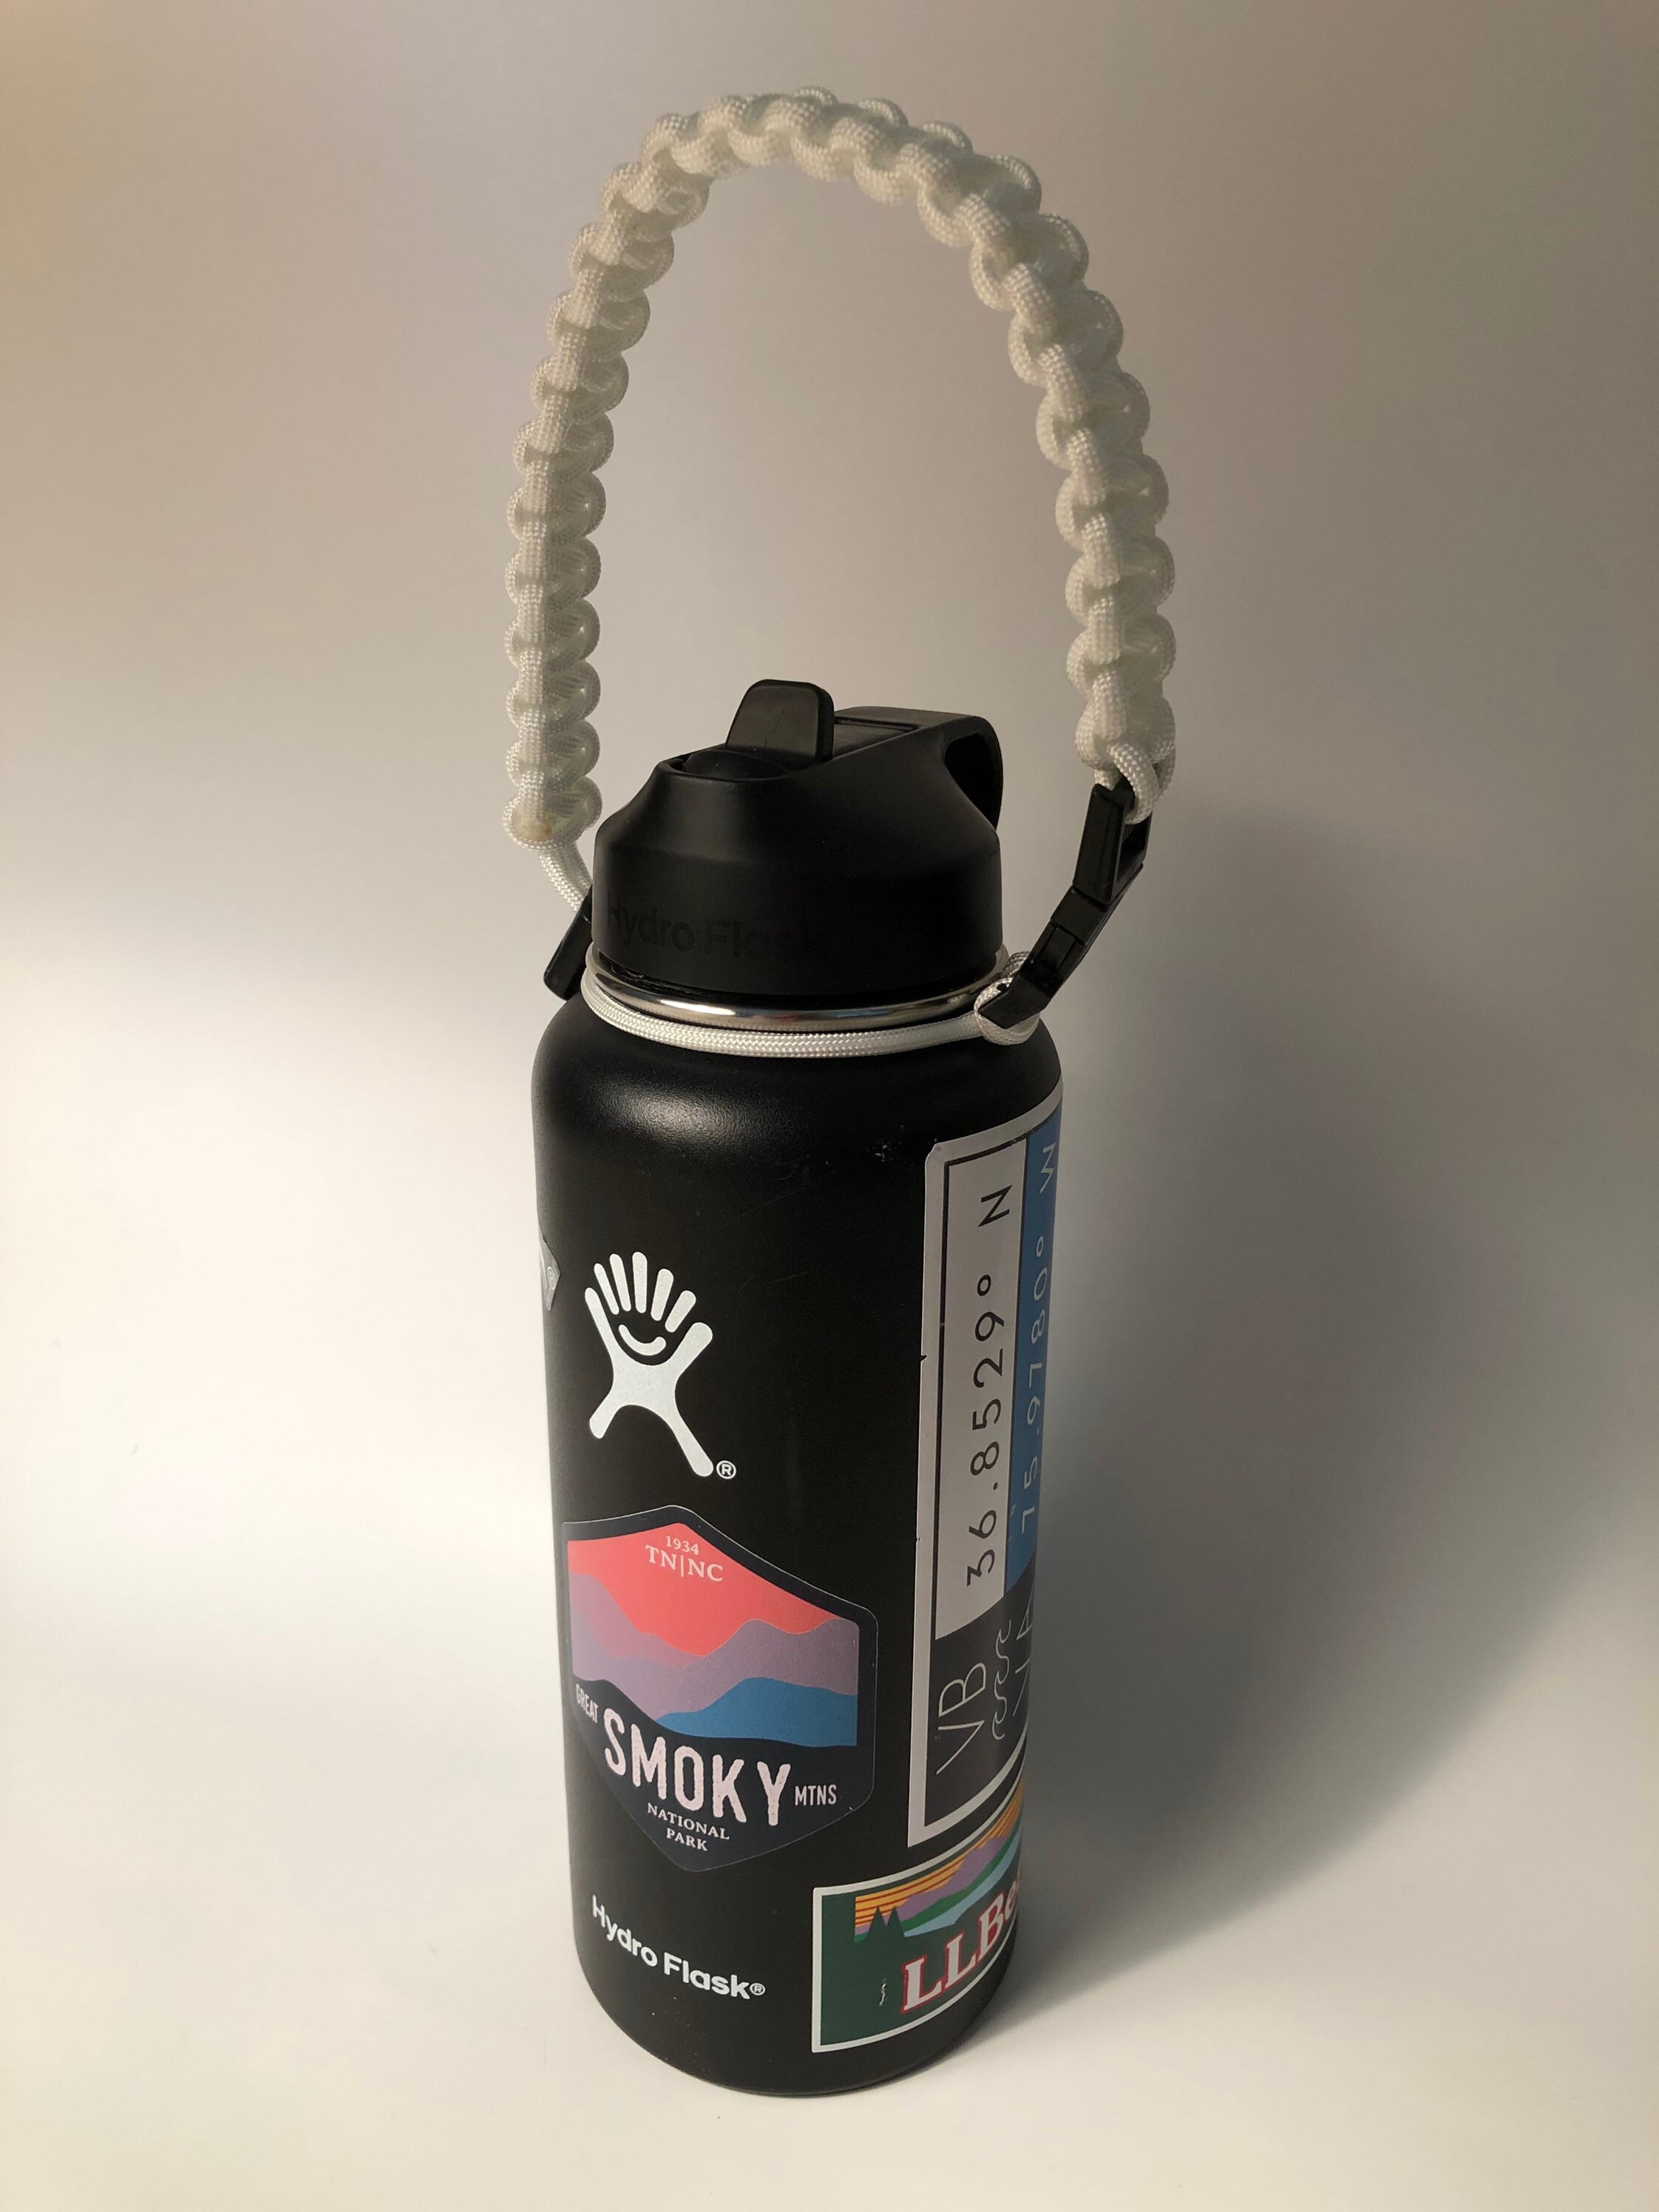 LX-SUNCX Paracord Handle for Hydro Flask 2.0 Wide Mouth Water Bottles(12 to  40oz),Survival Strap Carabiner Carrier Accessories,Plus a Nice Protective